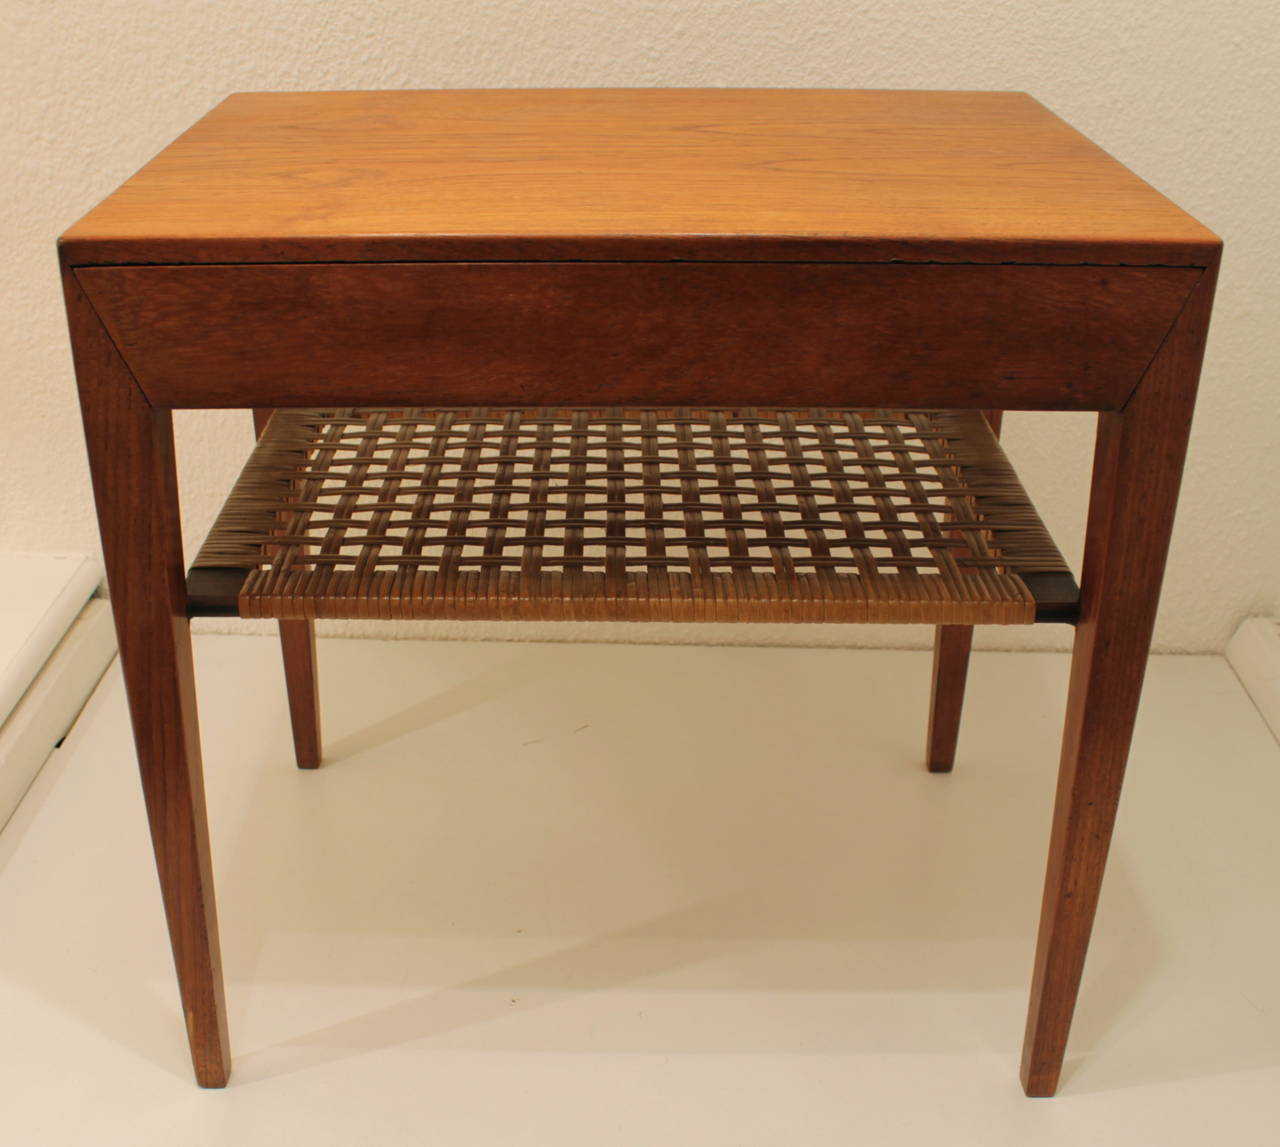 Severin Hansen cane & teak side table with one drawer
Produced by Haslev Cabinetmakers ca.1950's.